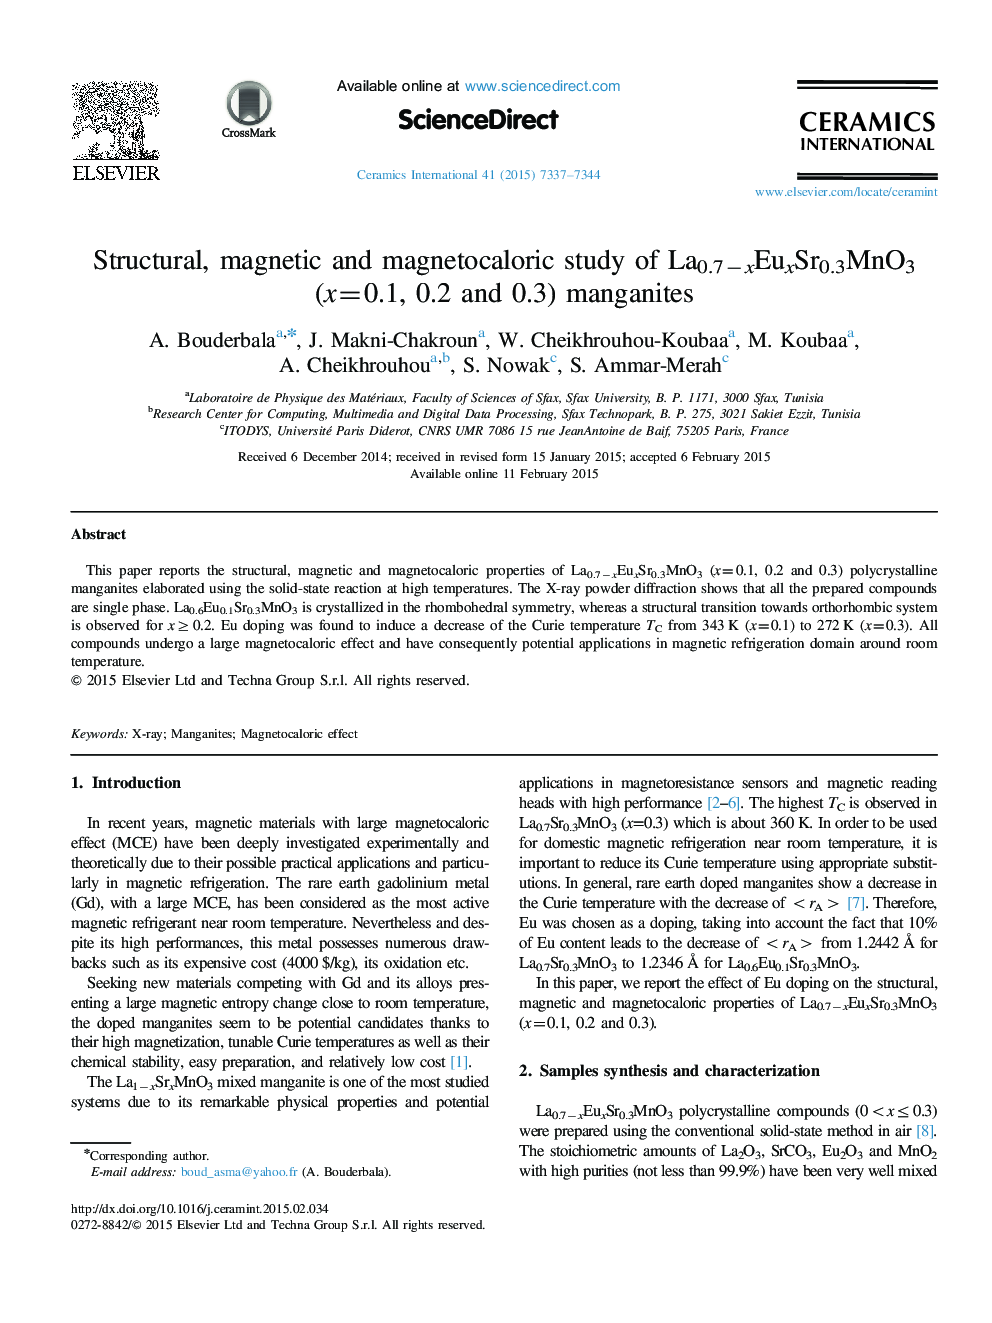 Structural, magnetic and magnetocaloric study of La0.7−xEuxSr0.3MnO3 (x=0.1, 0.2 and 0.3) manganites